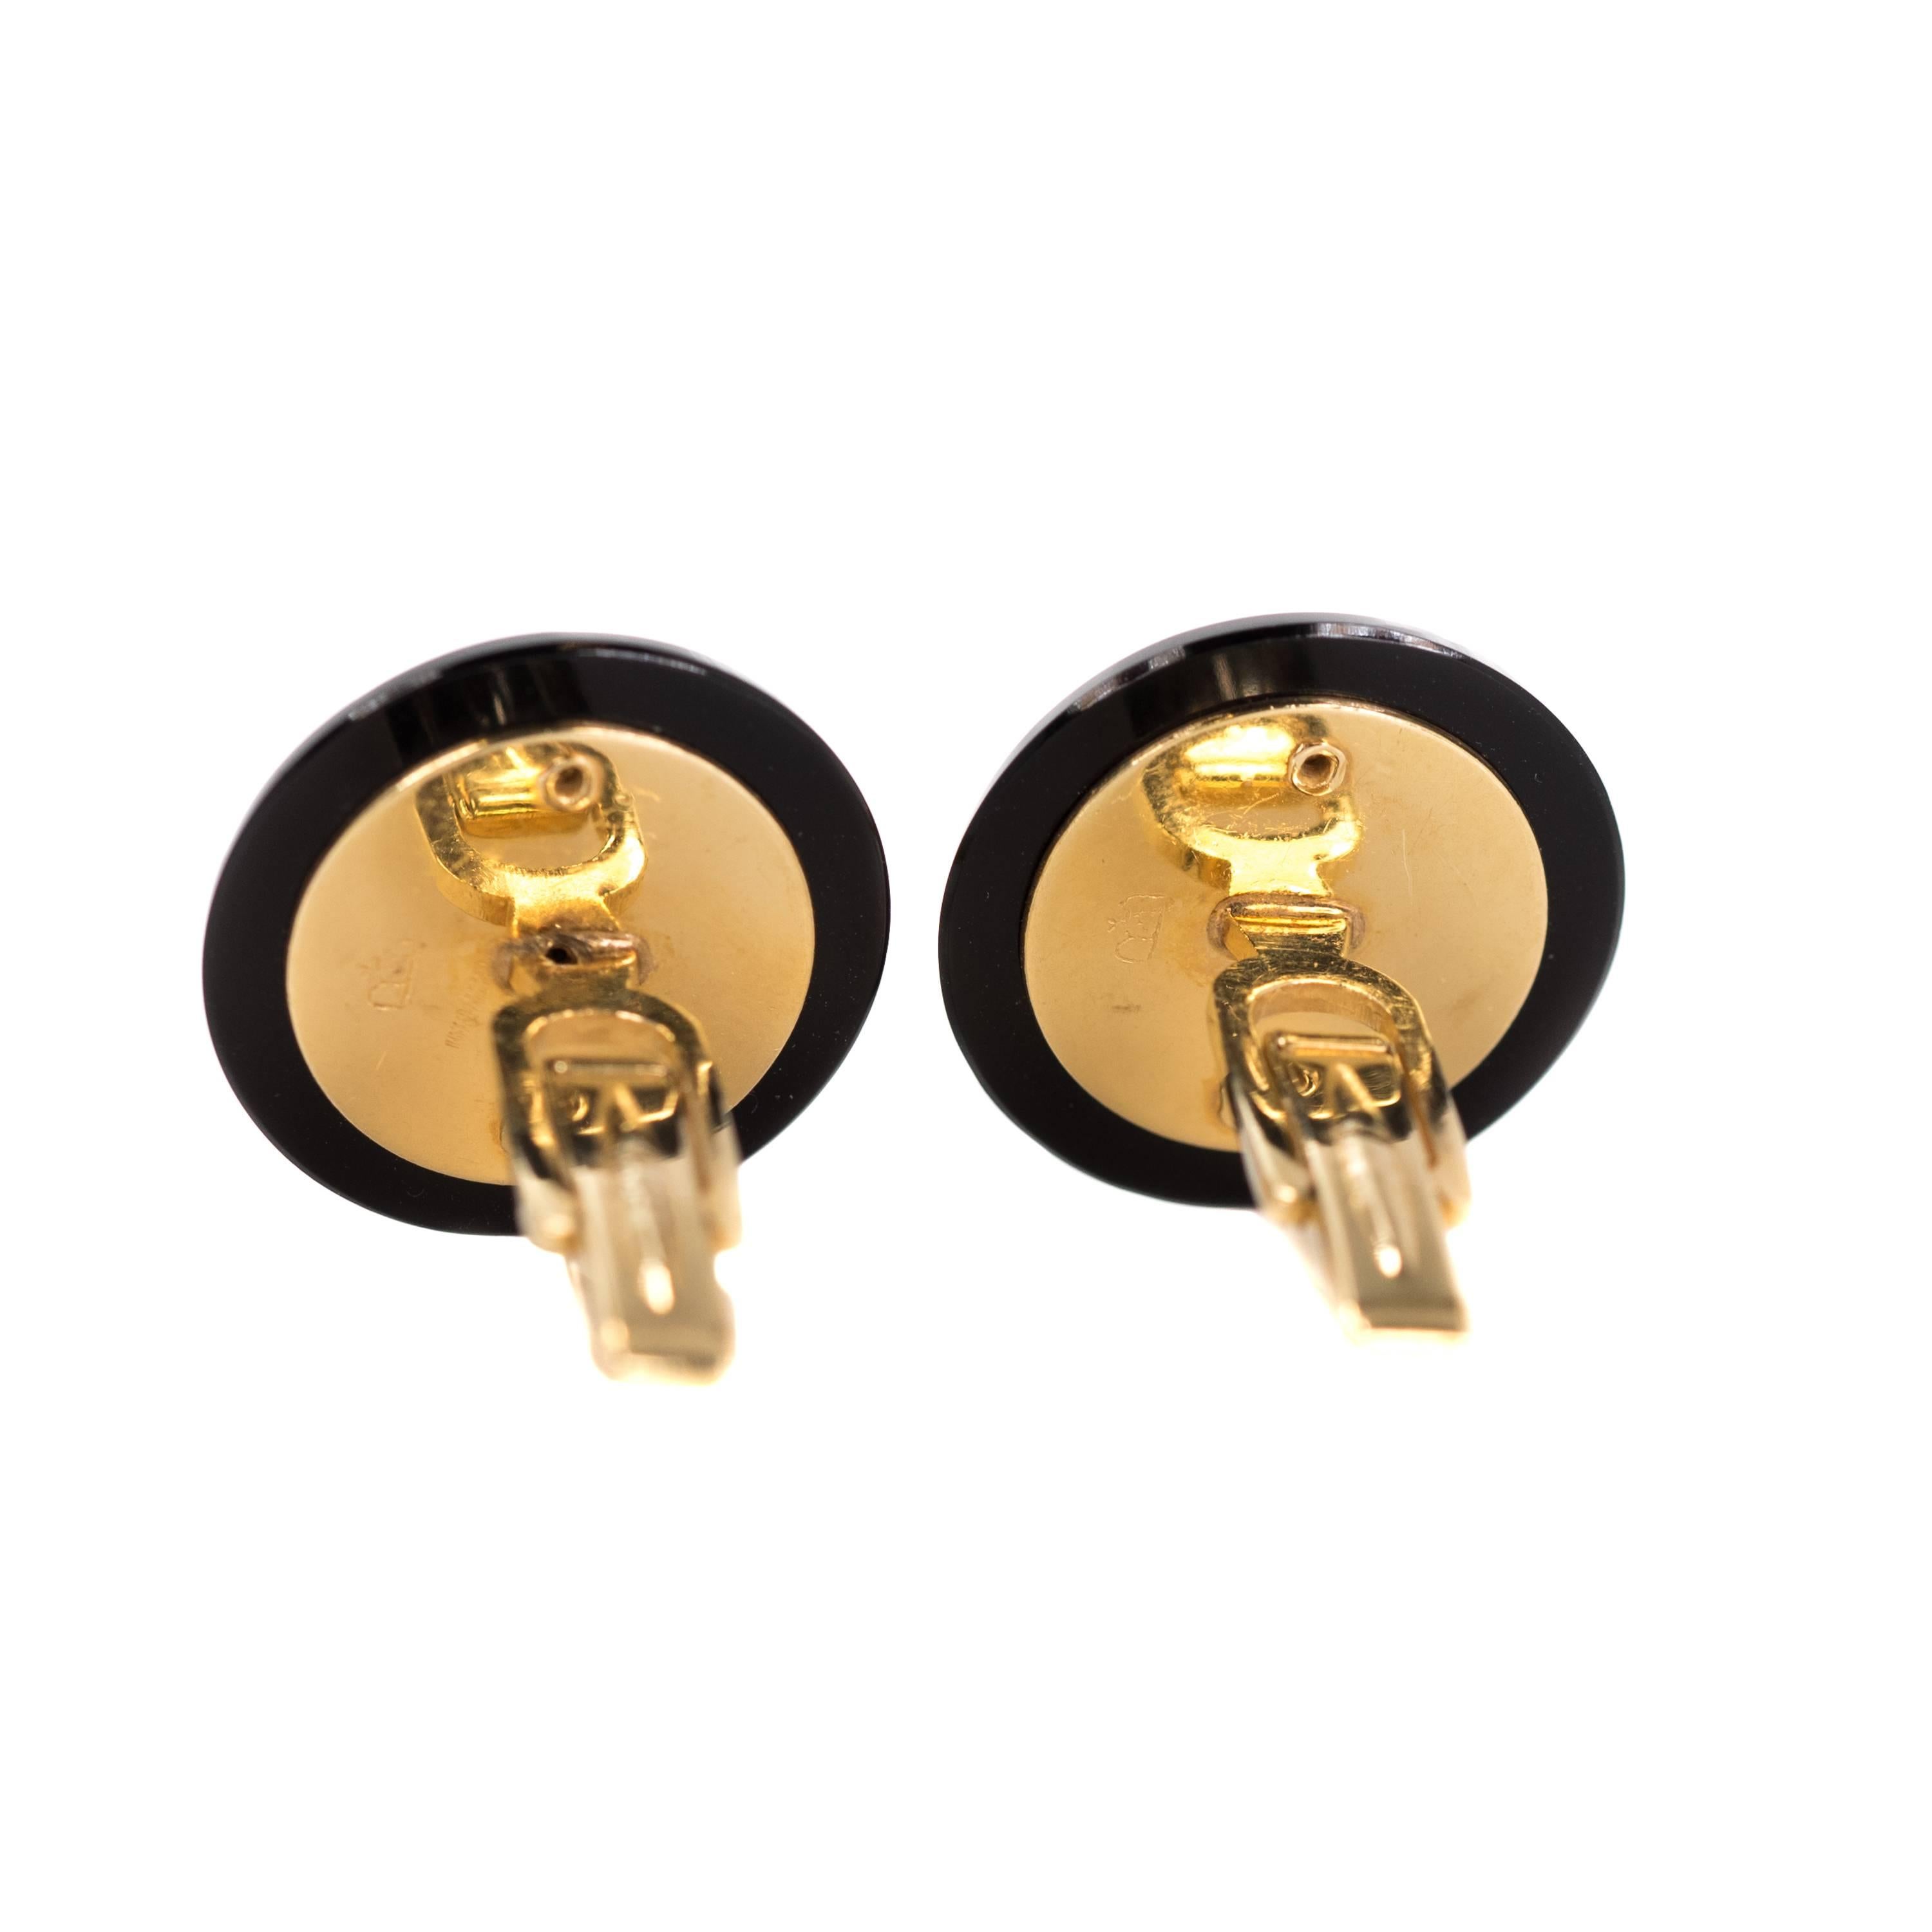 1940s Retro Cufflinks - 14k Yellow Gold, Onyx, Diamond

Features 2 Single cut Diamonds, Onyx and 14k Yellow Gold. 
Each cufflink features one Single cut Diamond prong set at the center of a 14k Yellow gold disc. An 8 point star radiates from the